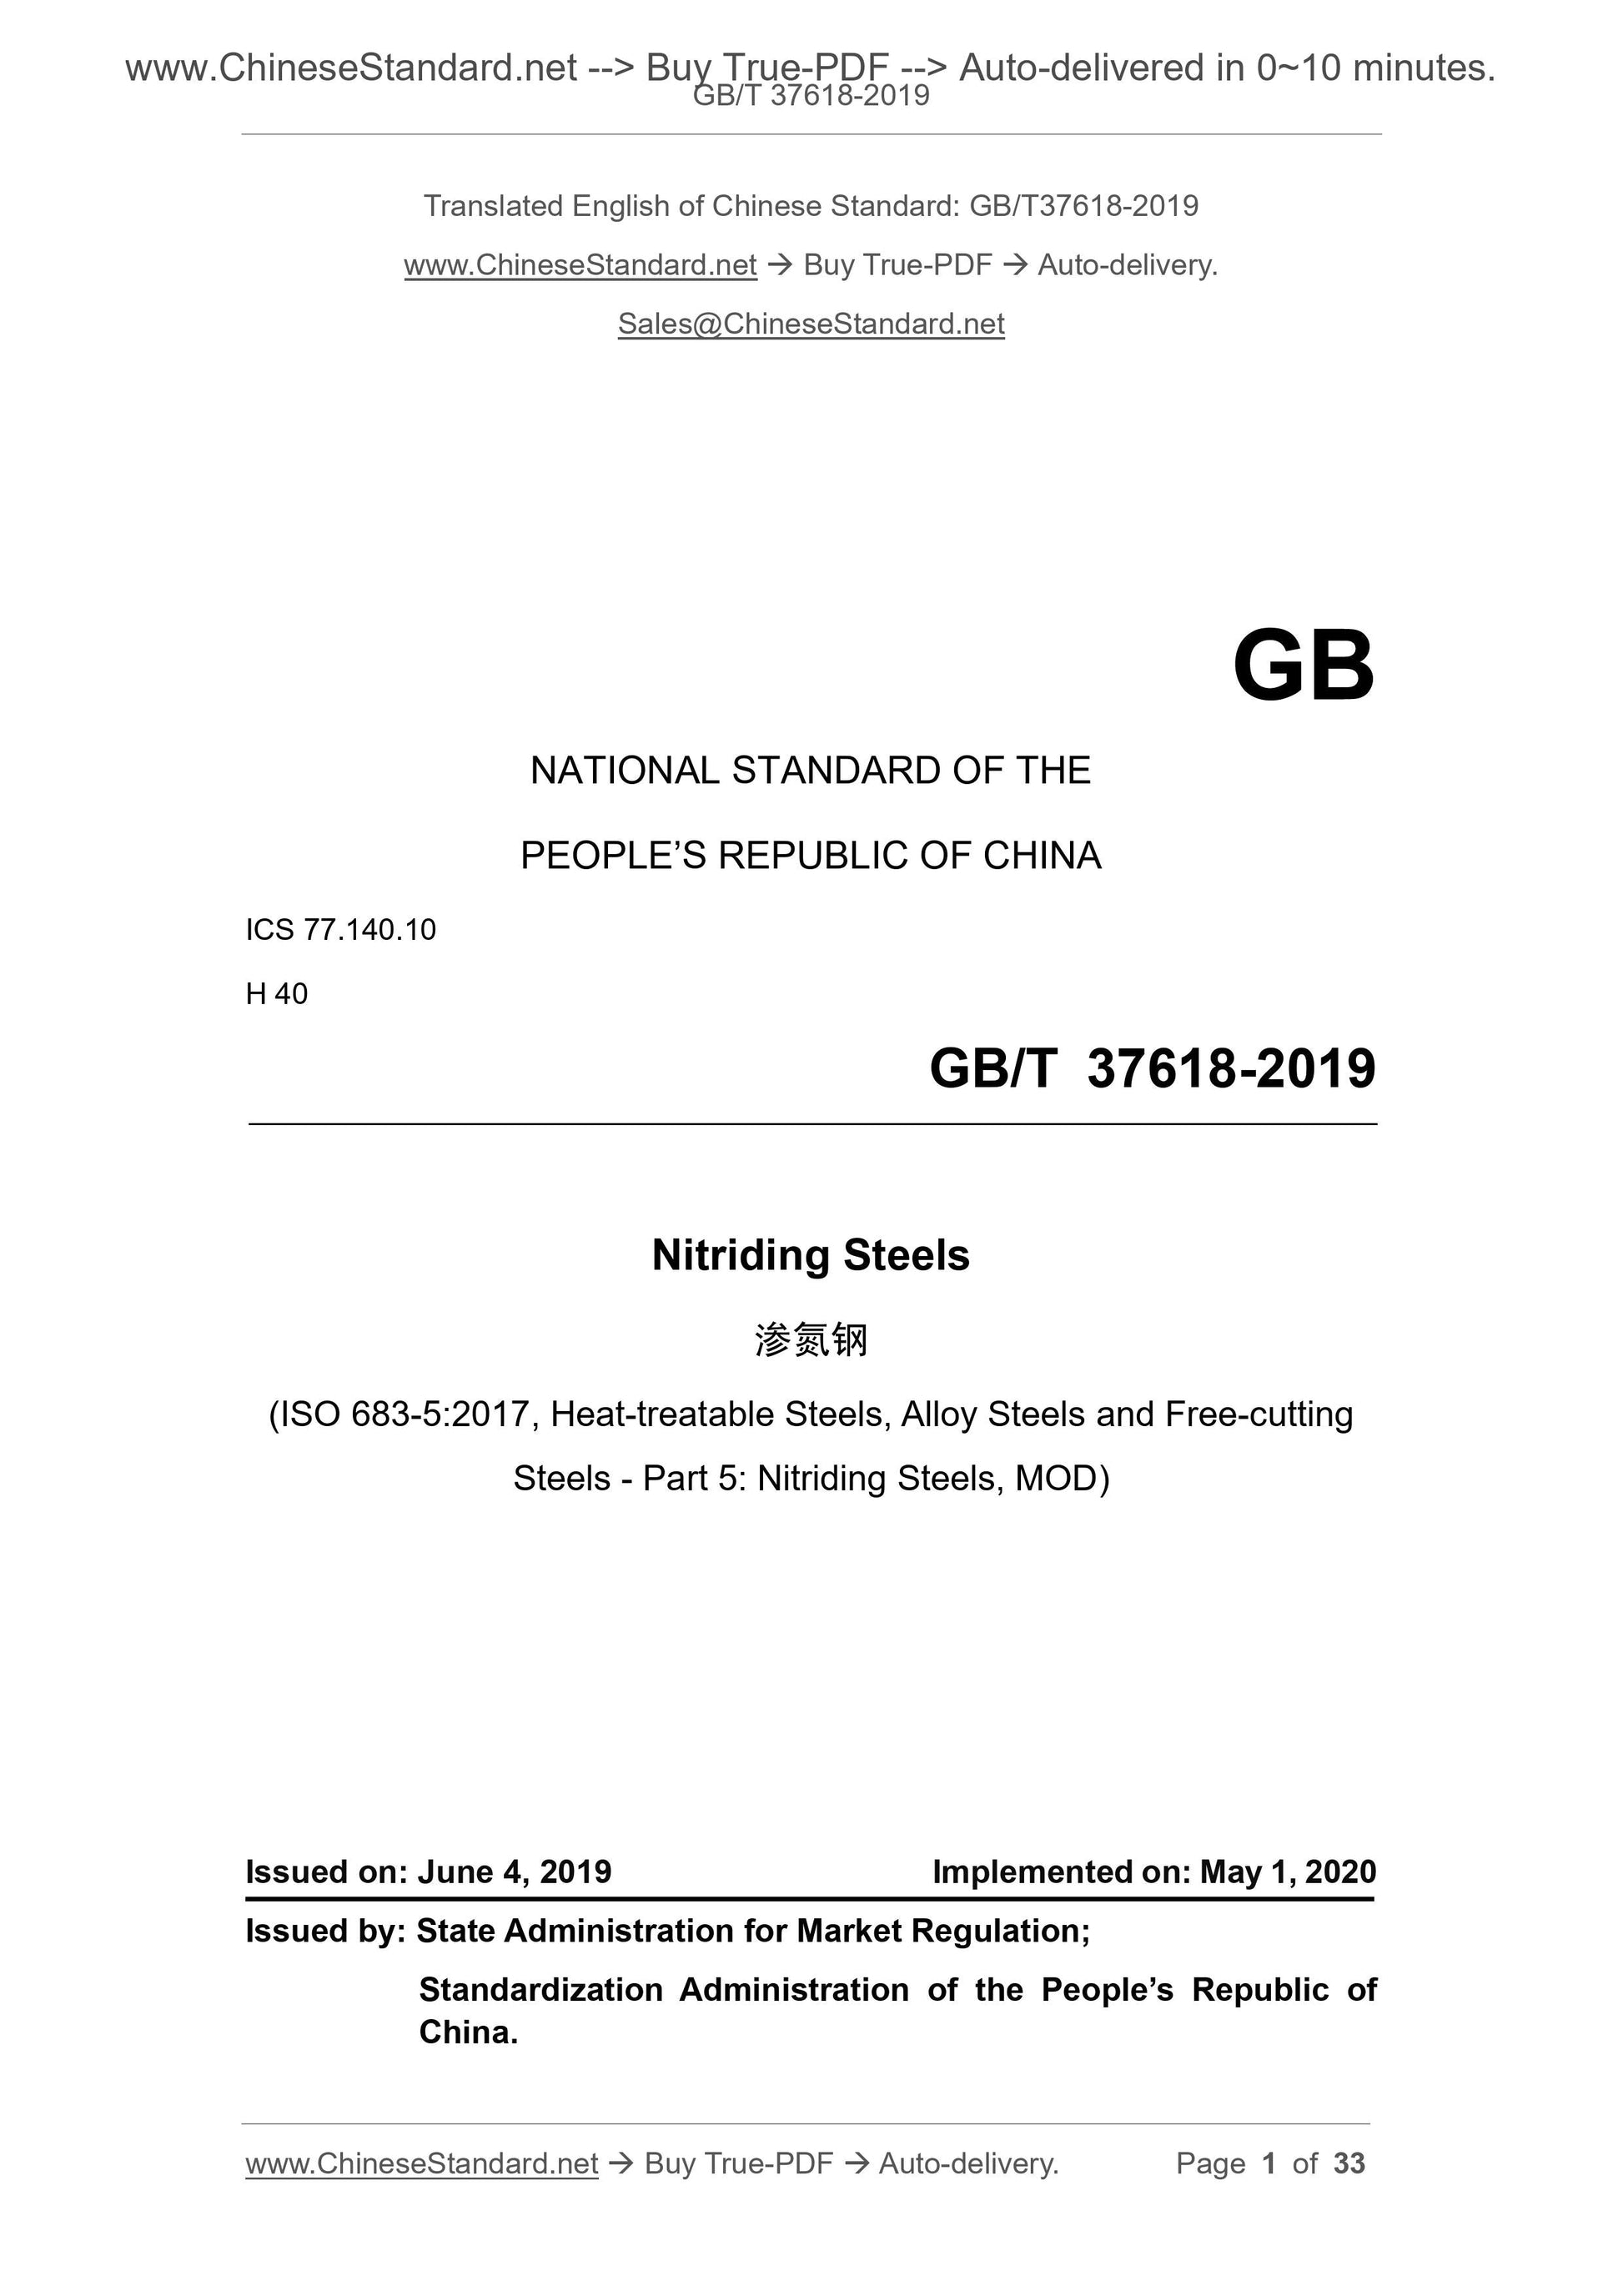 GB/T 37618-2019 Page 1